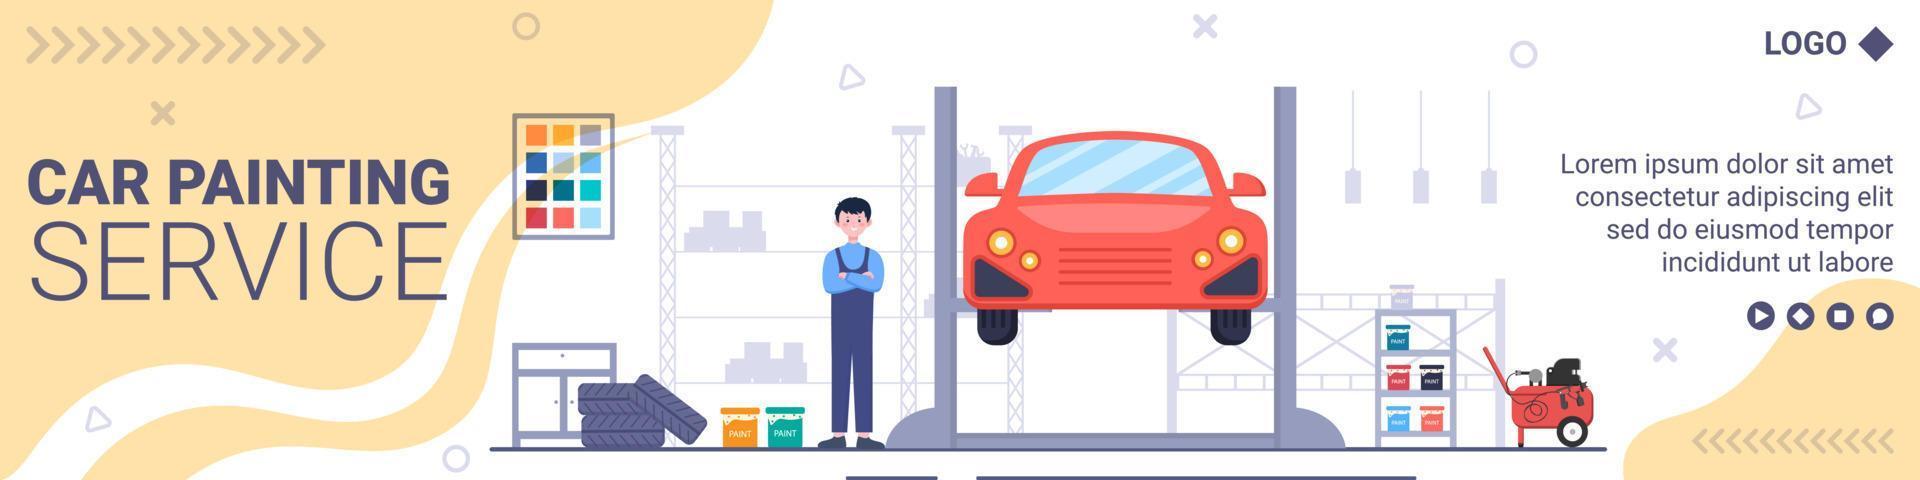 Car Painting Machine Banner Template Flat Illustration Editable of Square Background Suitable for Social media or Web Internet Ads vector